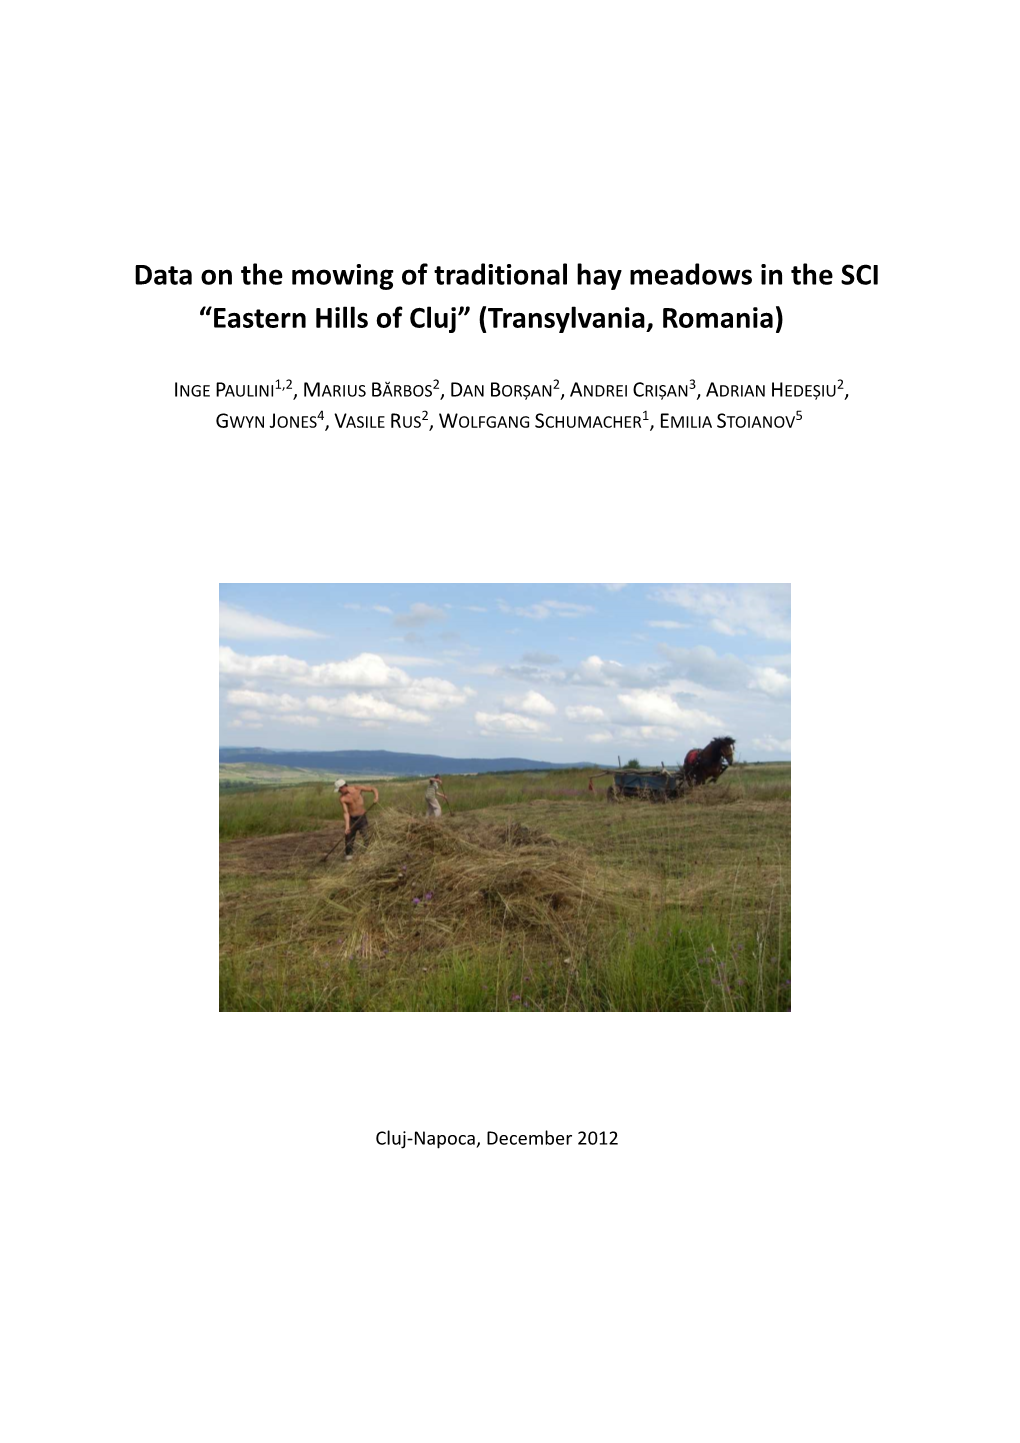 Data on the Mowing of Traditional Hay Meadows in the SCI “Eastern Hills of Cluj” (Transylvania, Romania)